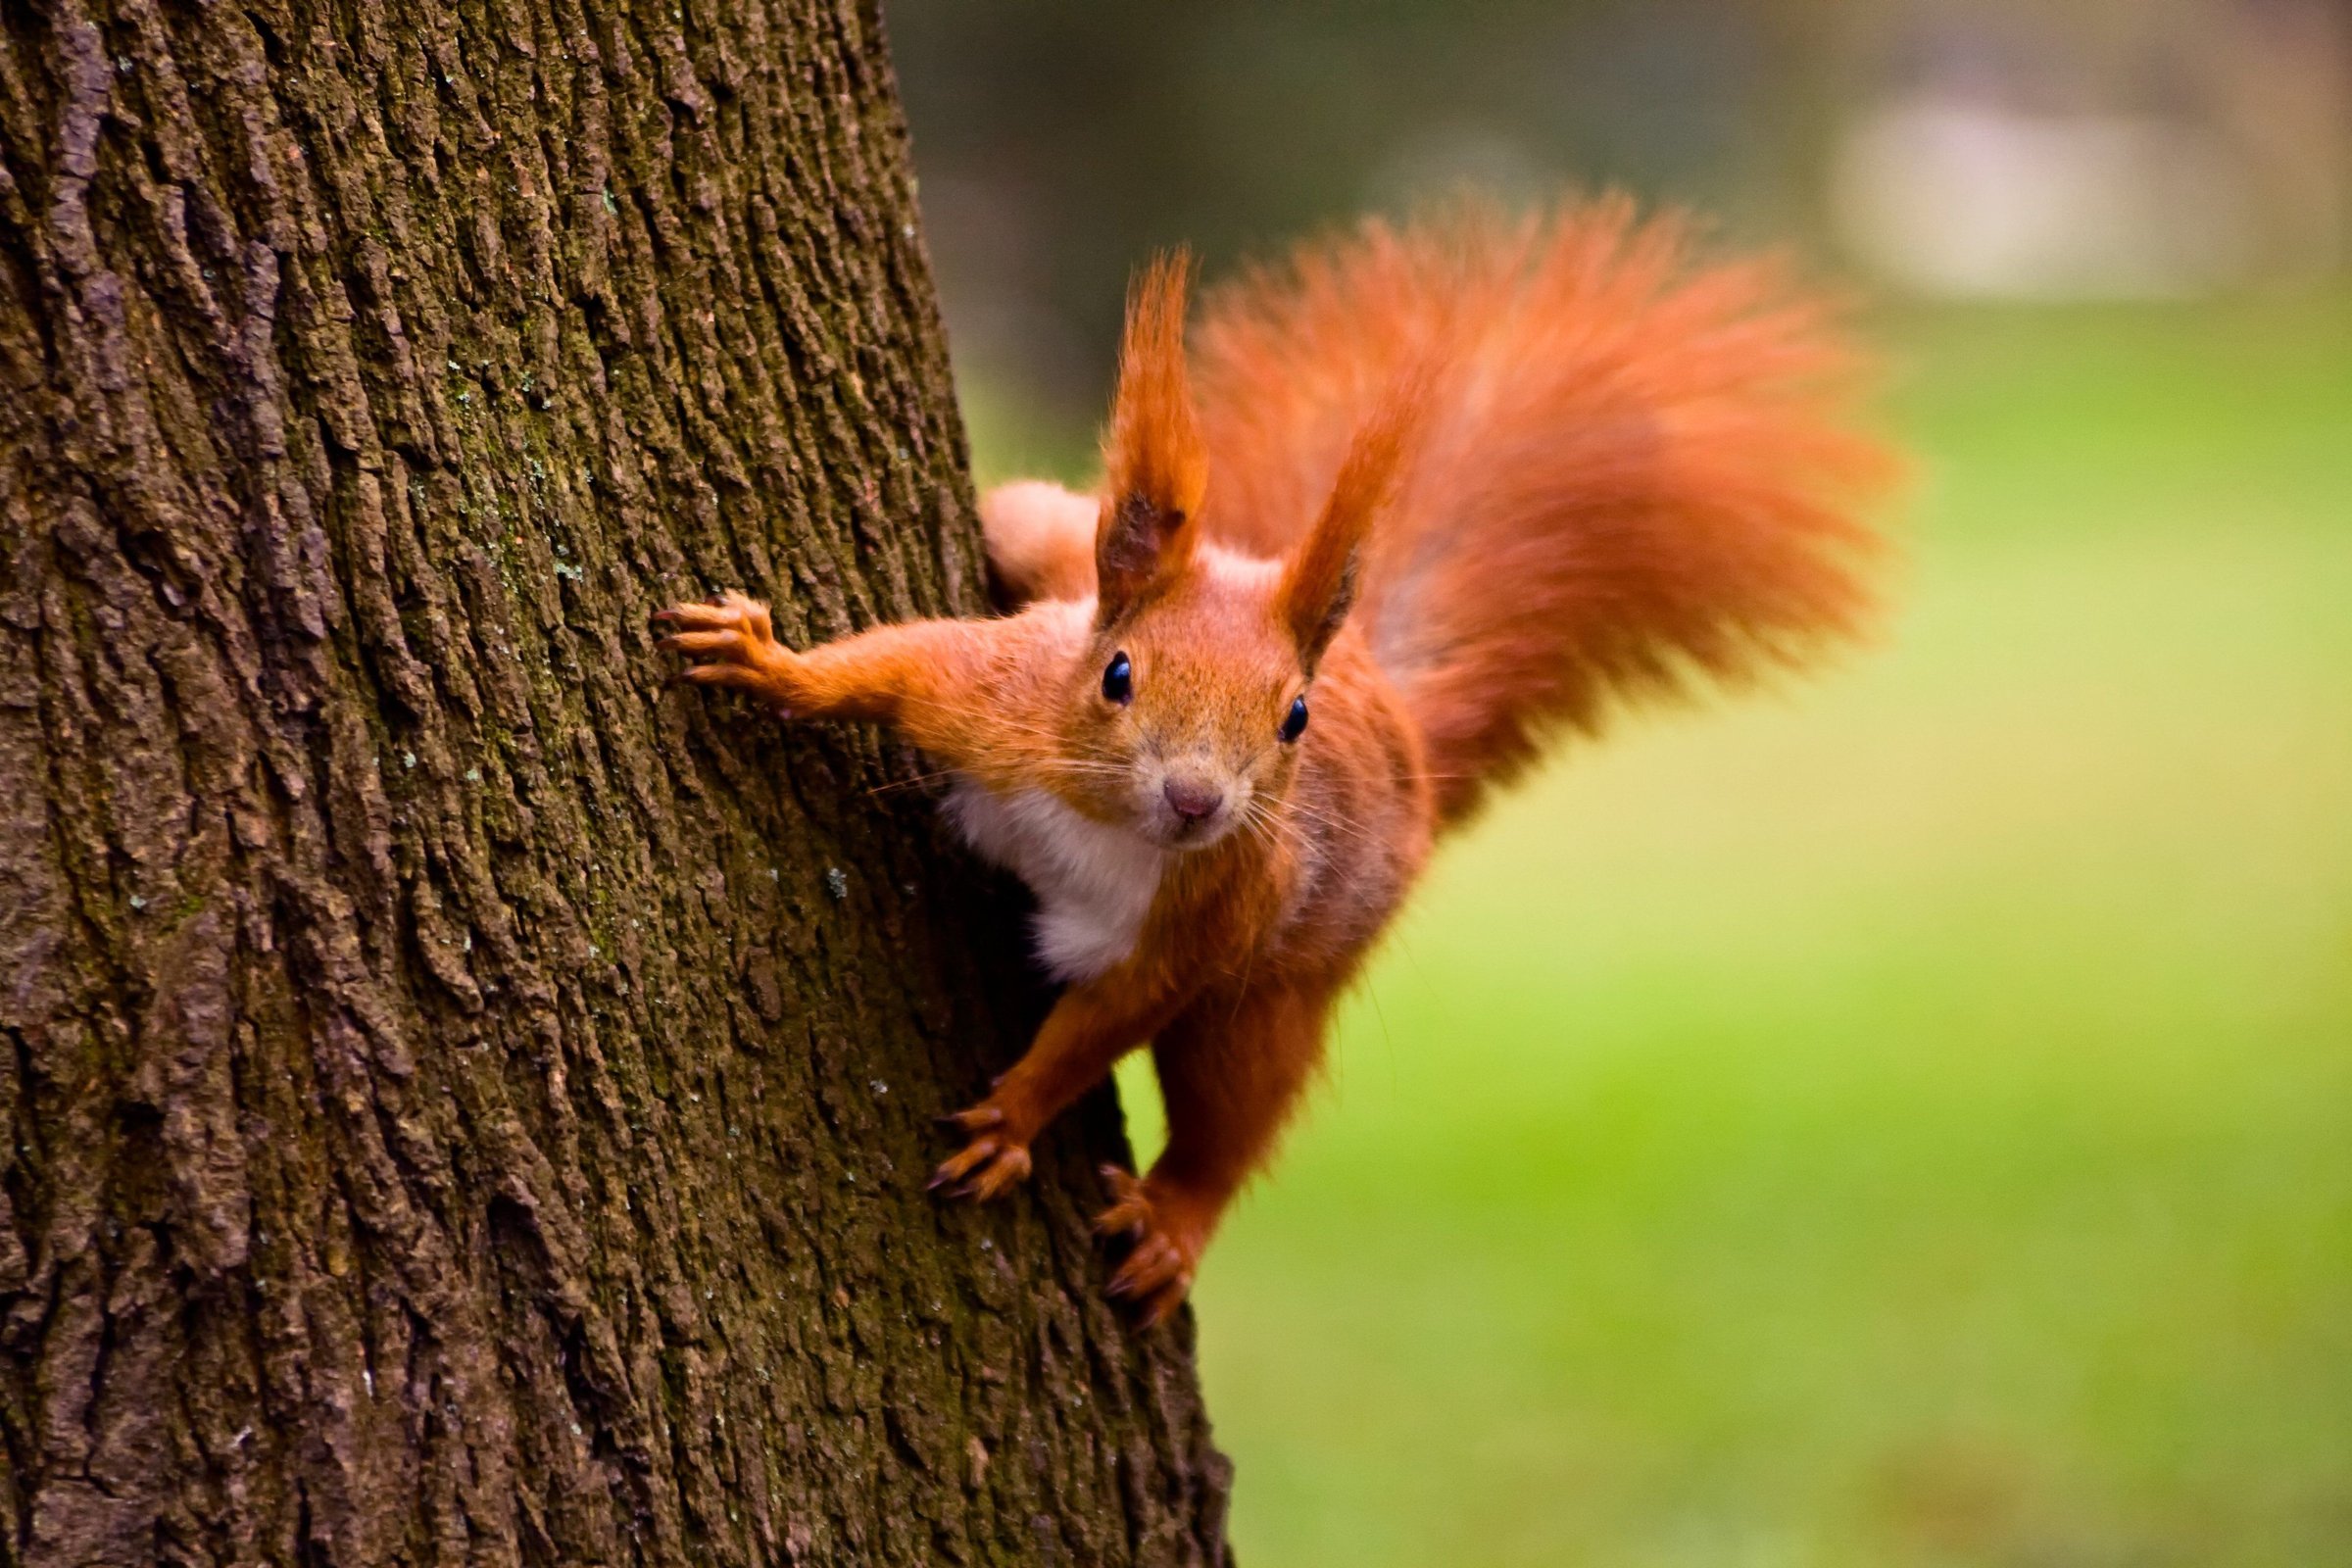 Why do we love red squirrels?